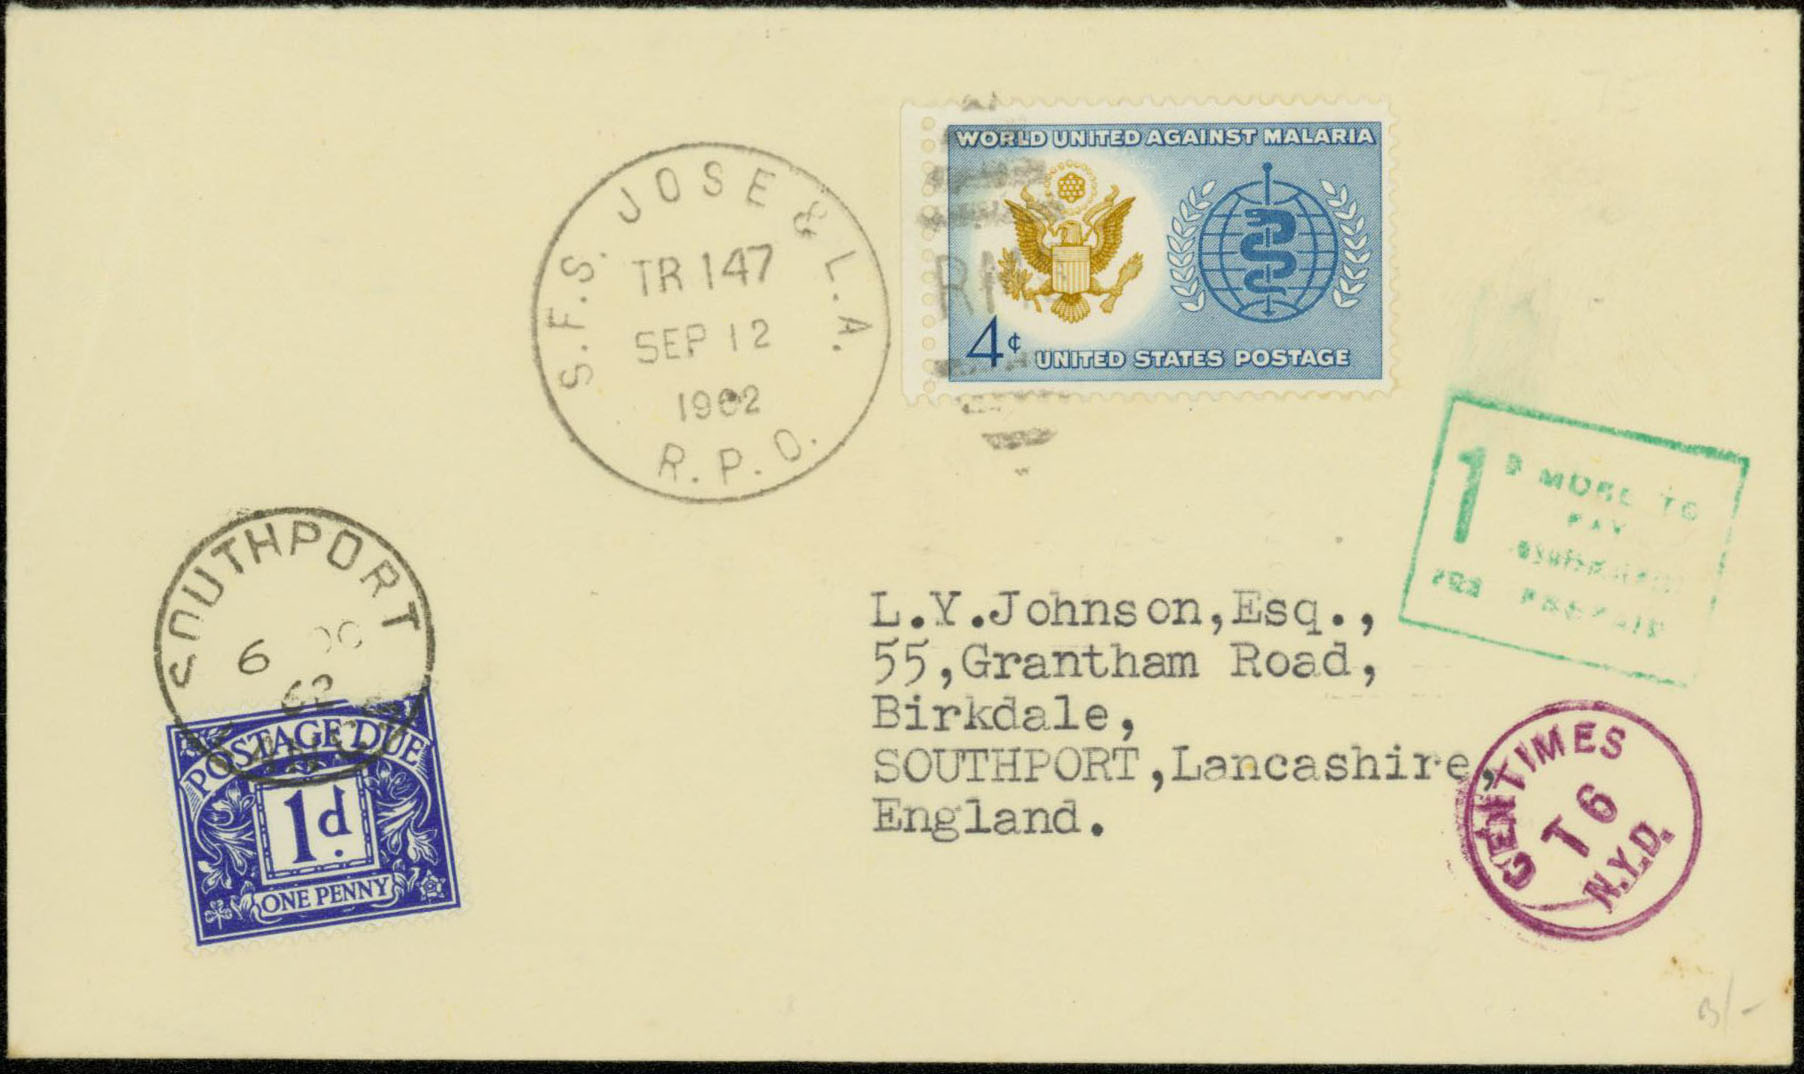 1962, September 12th, S.F.S. Jose and L.A., RPO to England. International Printed Matter Rate. (Short paid 1¢, double the deficiency, 2¢. 2 centimes = 1¢, 6 centimes due or 1d) 